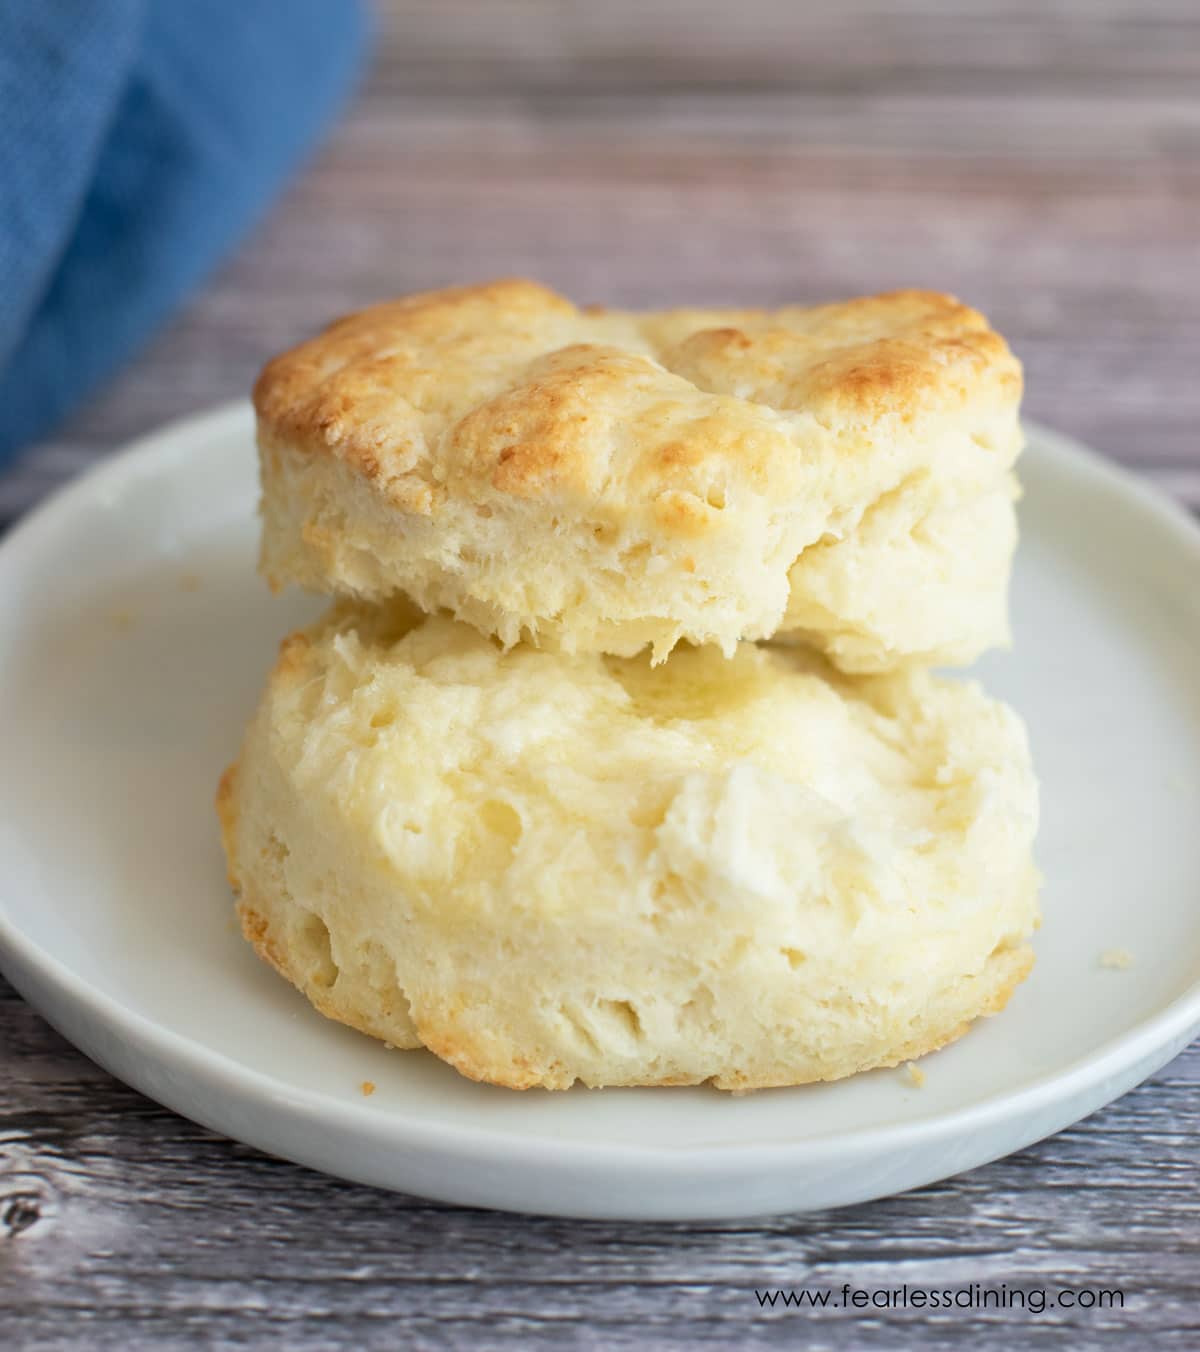 A biscuit cut in half on a plate with butter.